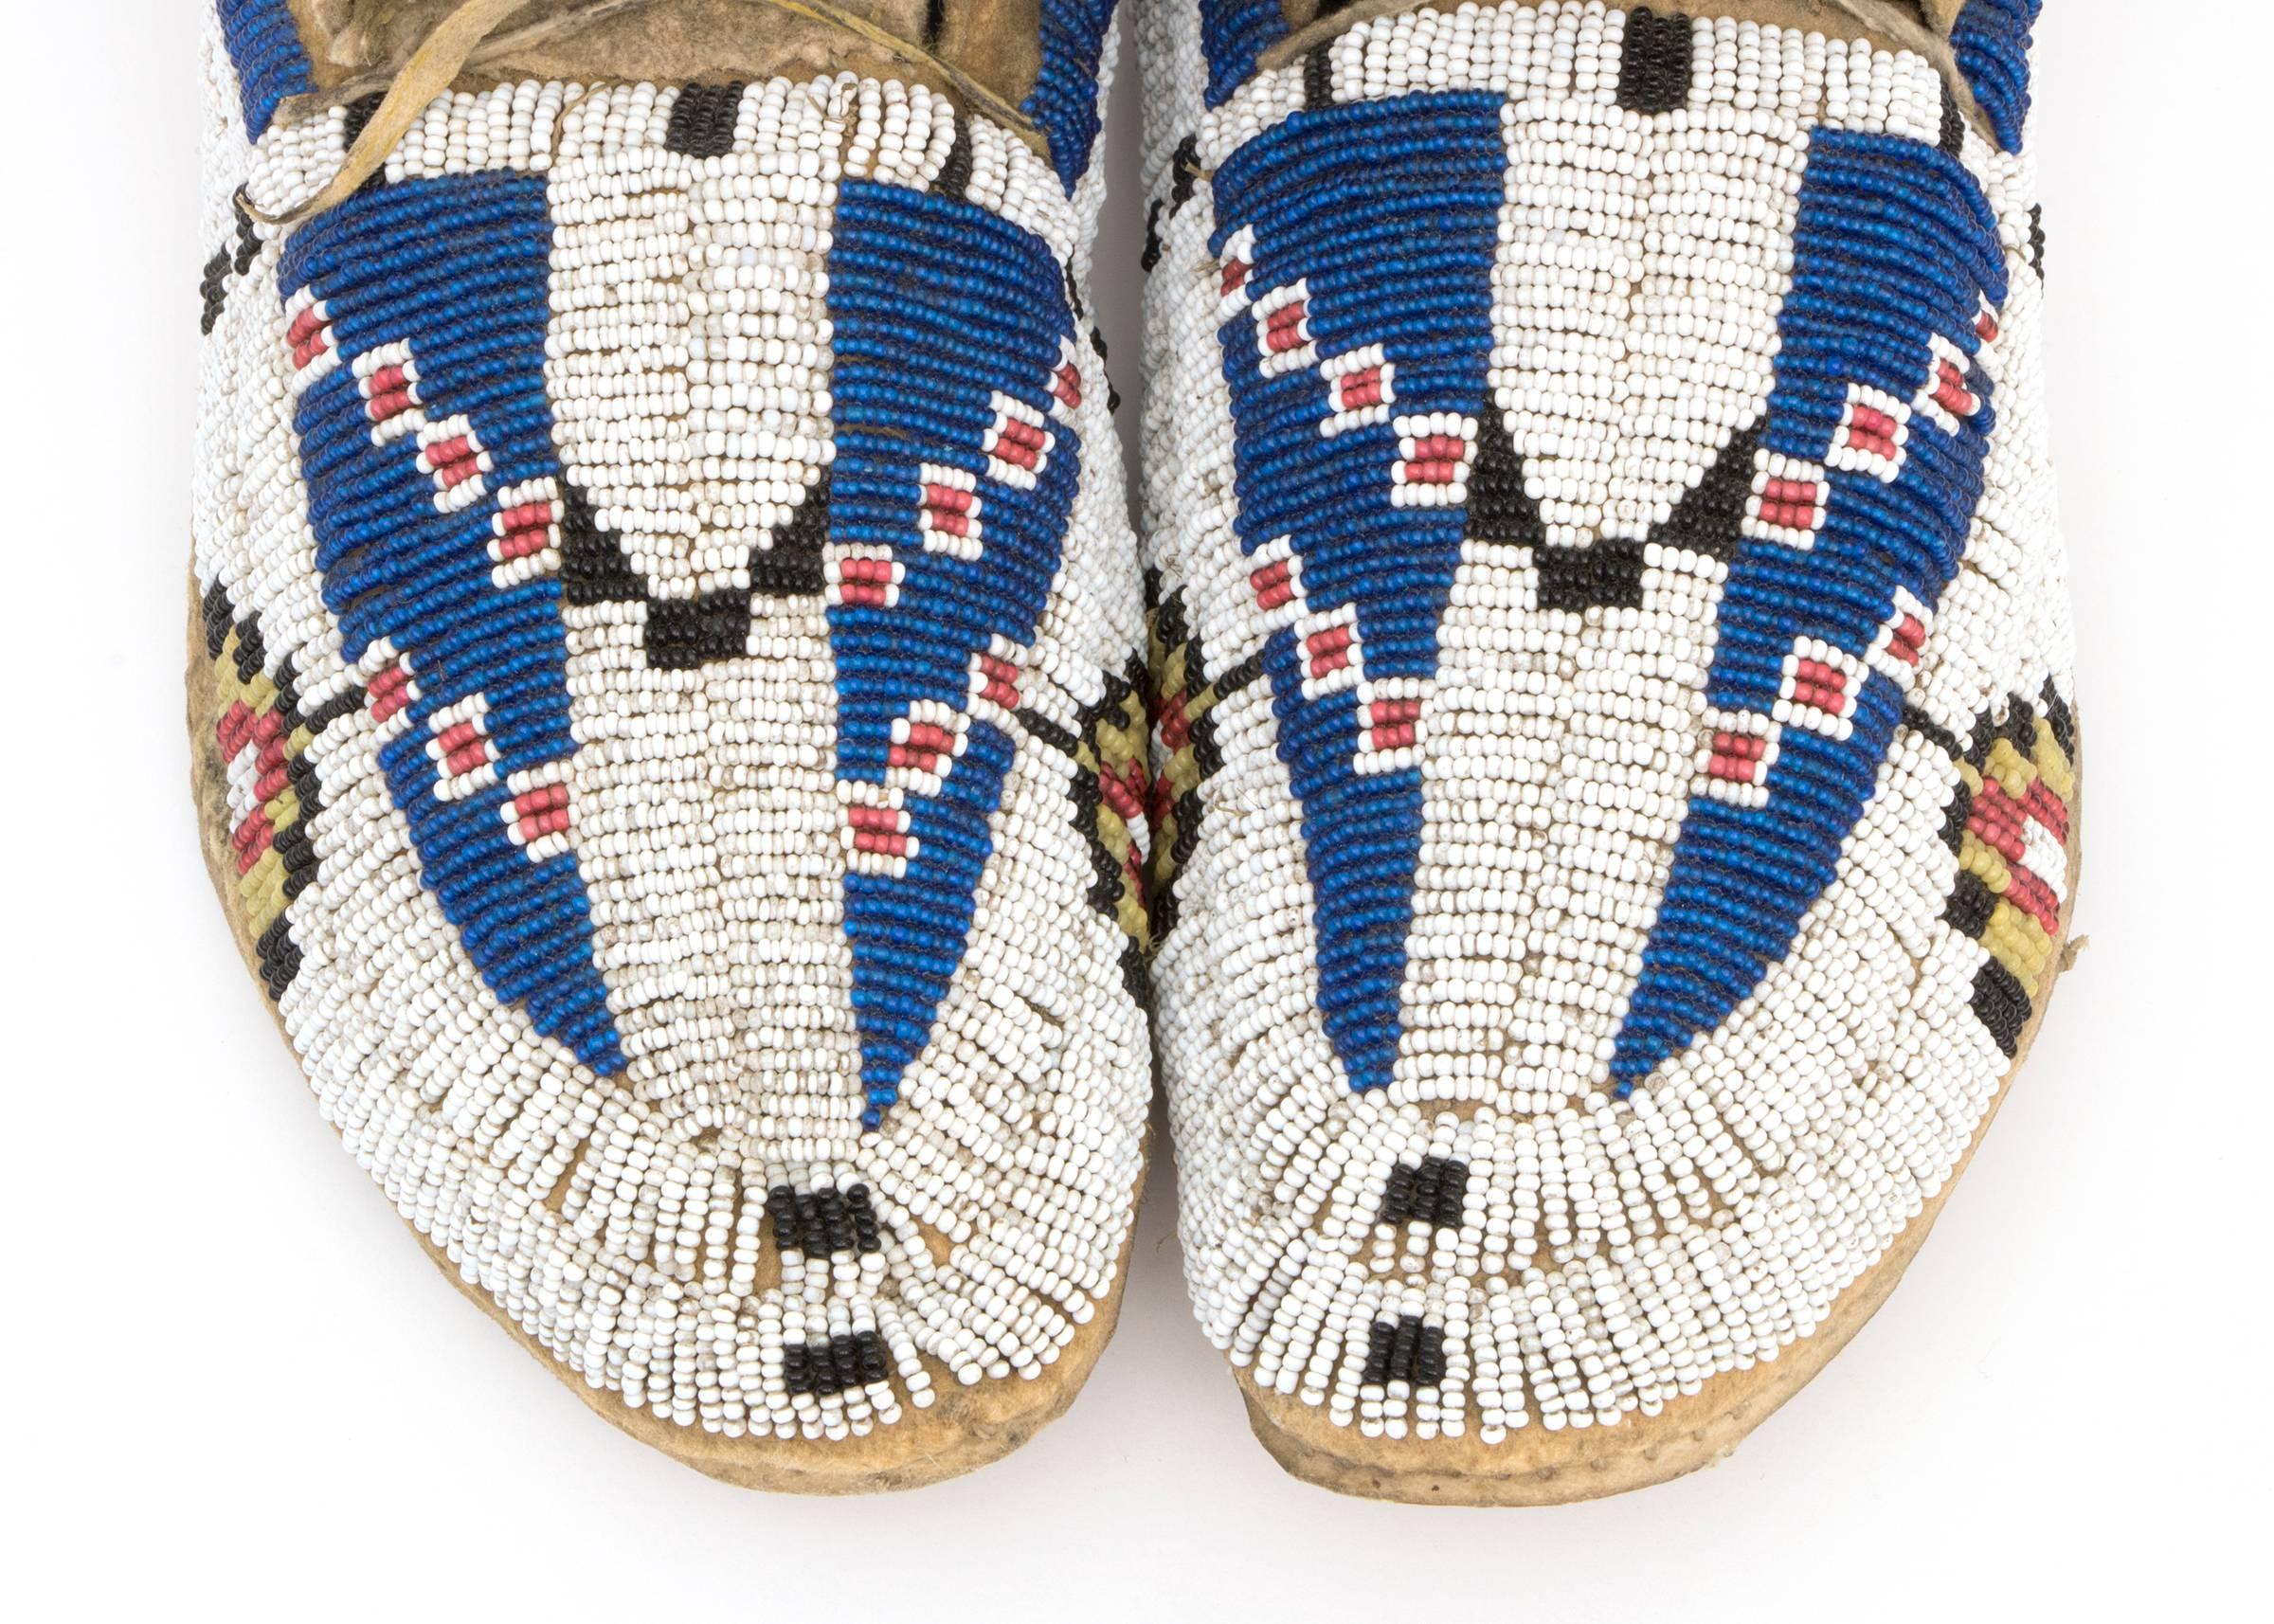 Hide Antique Native American Beaded Child's Moccasins, Cheyenne, 19th Century